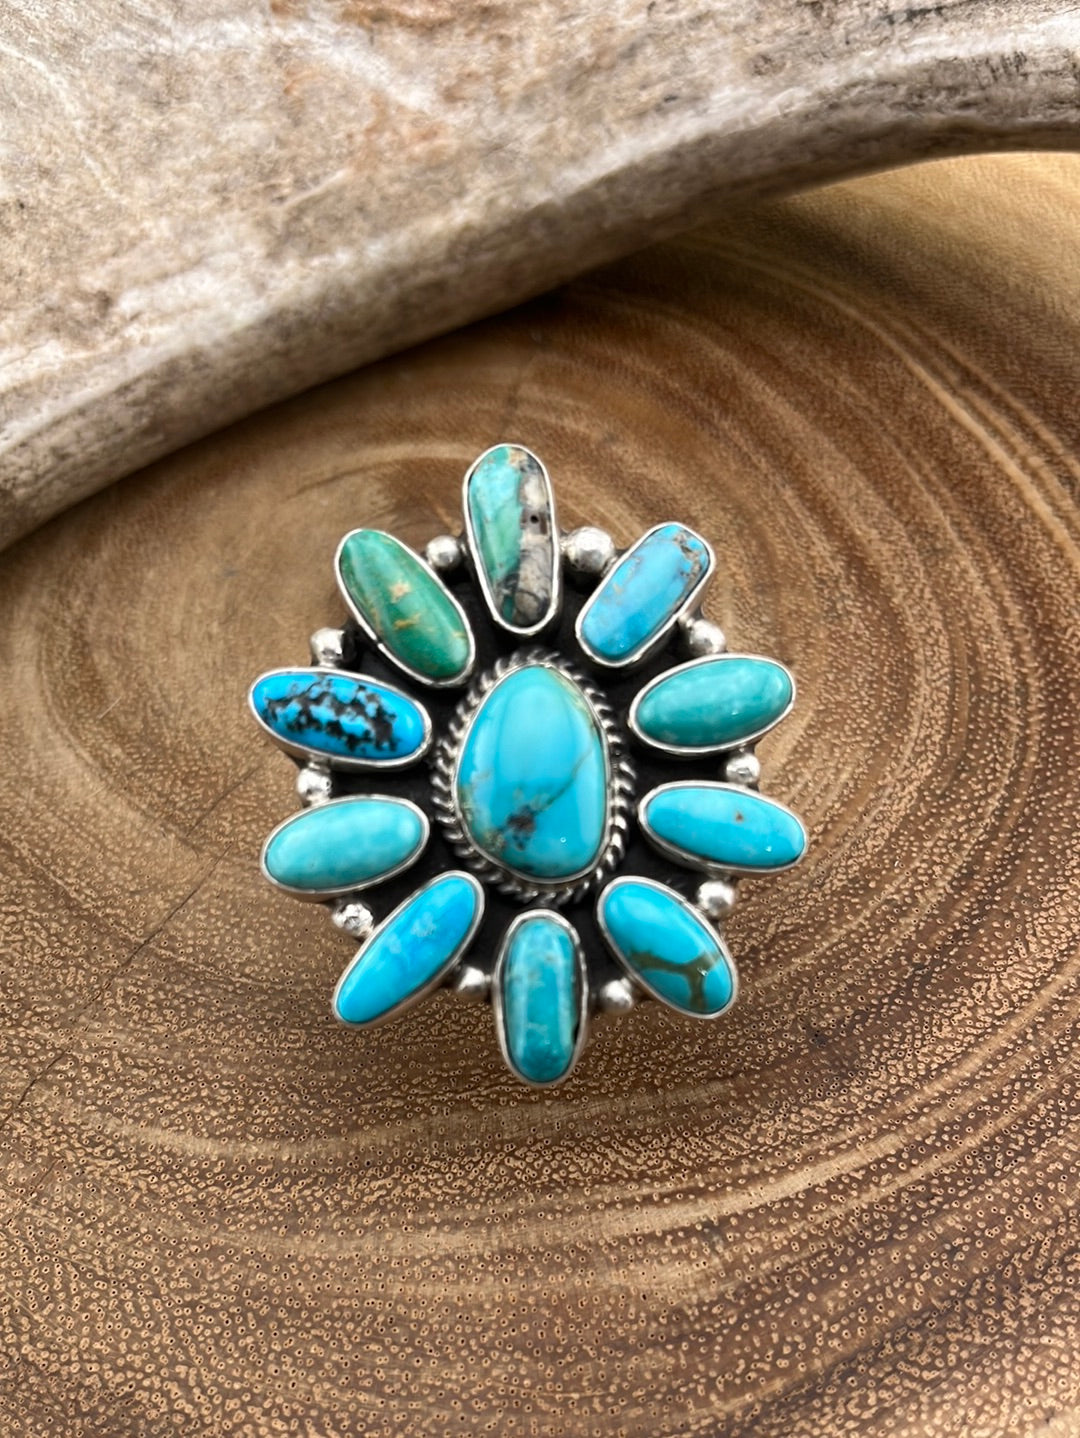 Jackie Sterling 11 Stone Turquoise Ring - Adjustable